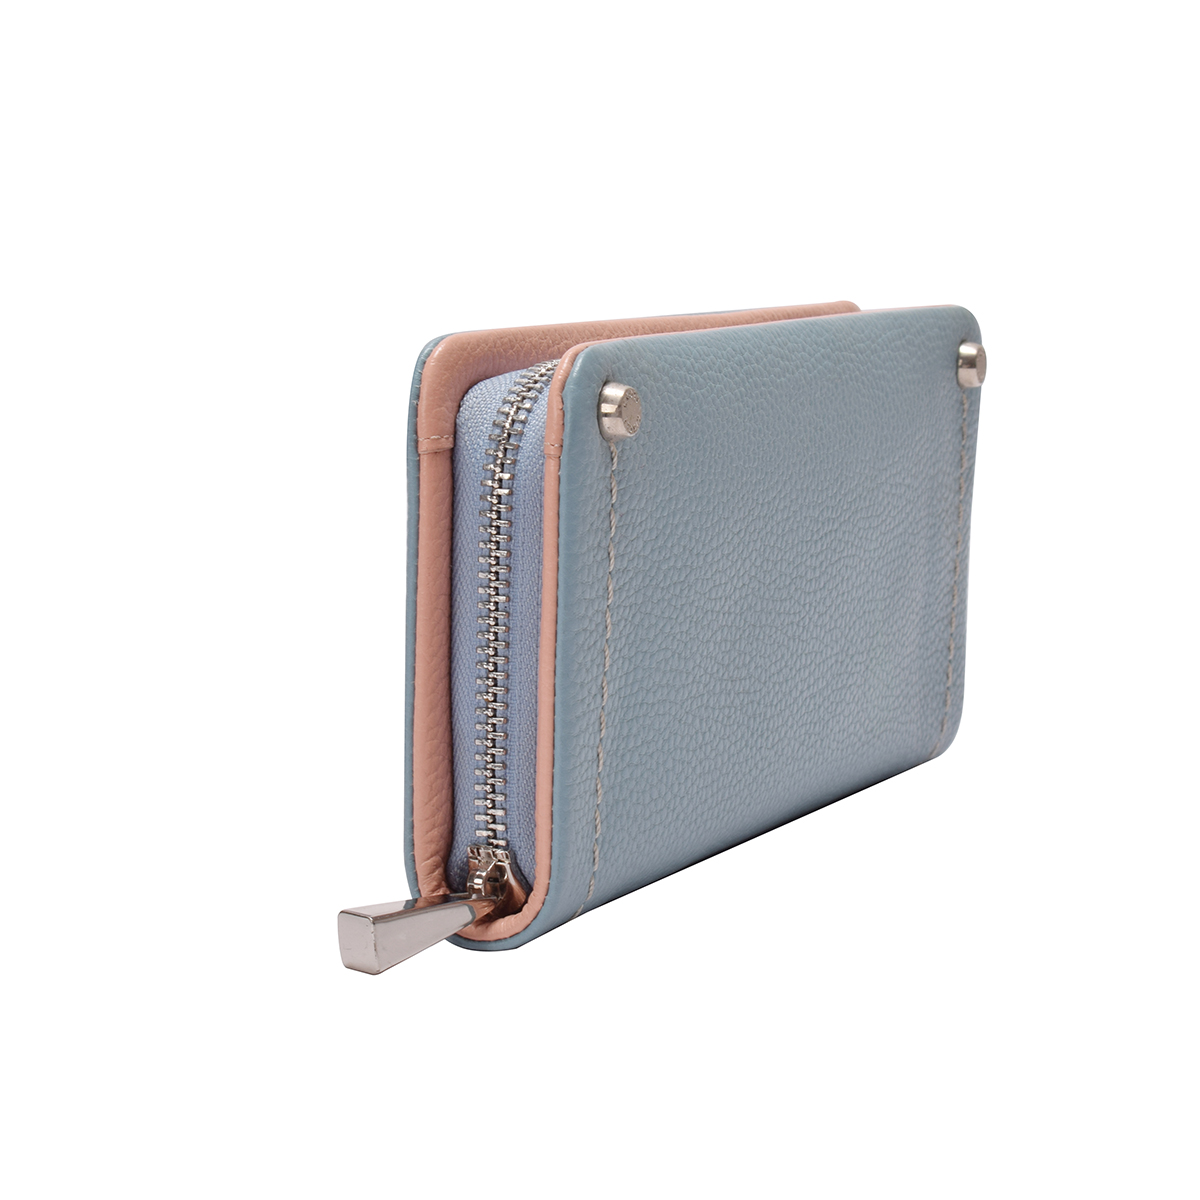 Sanlly latest card wallet womens free sample for girls-2